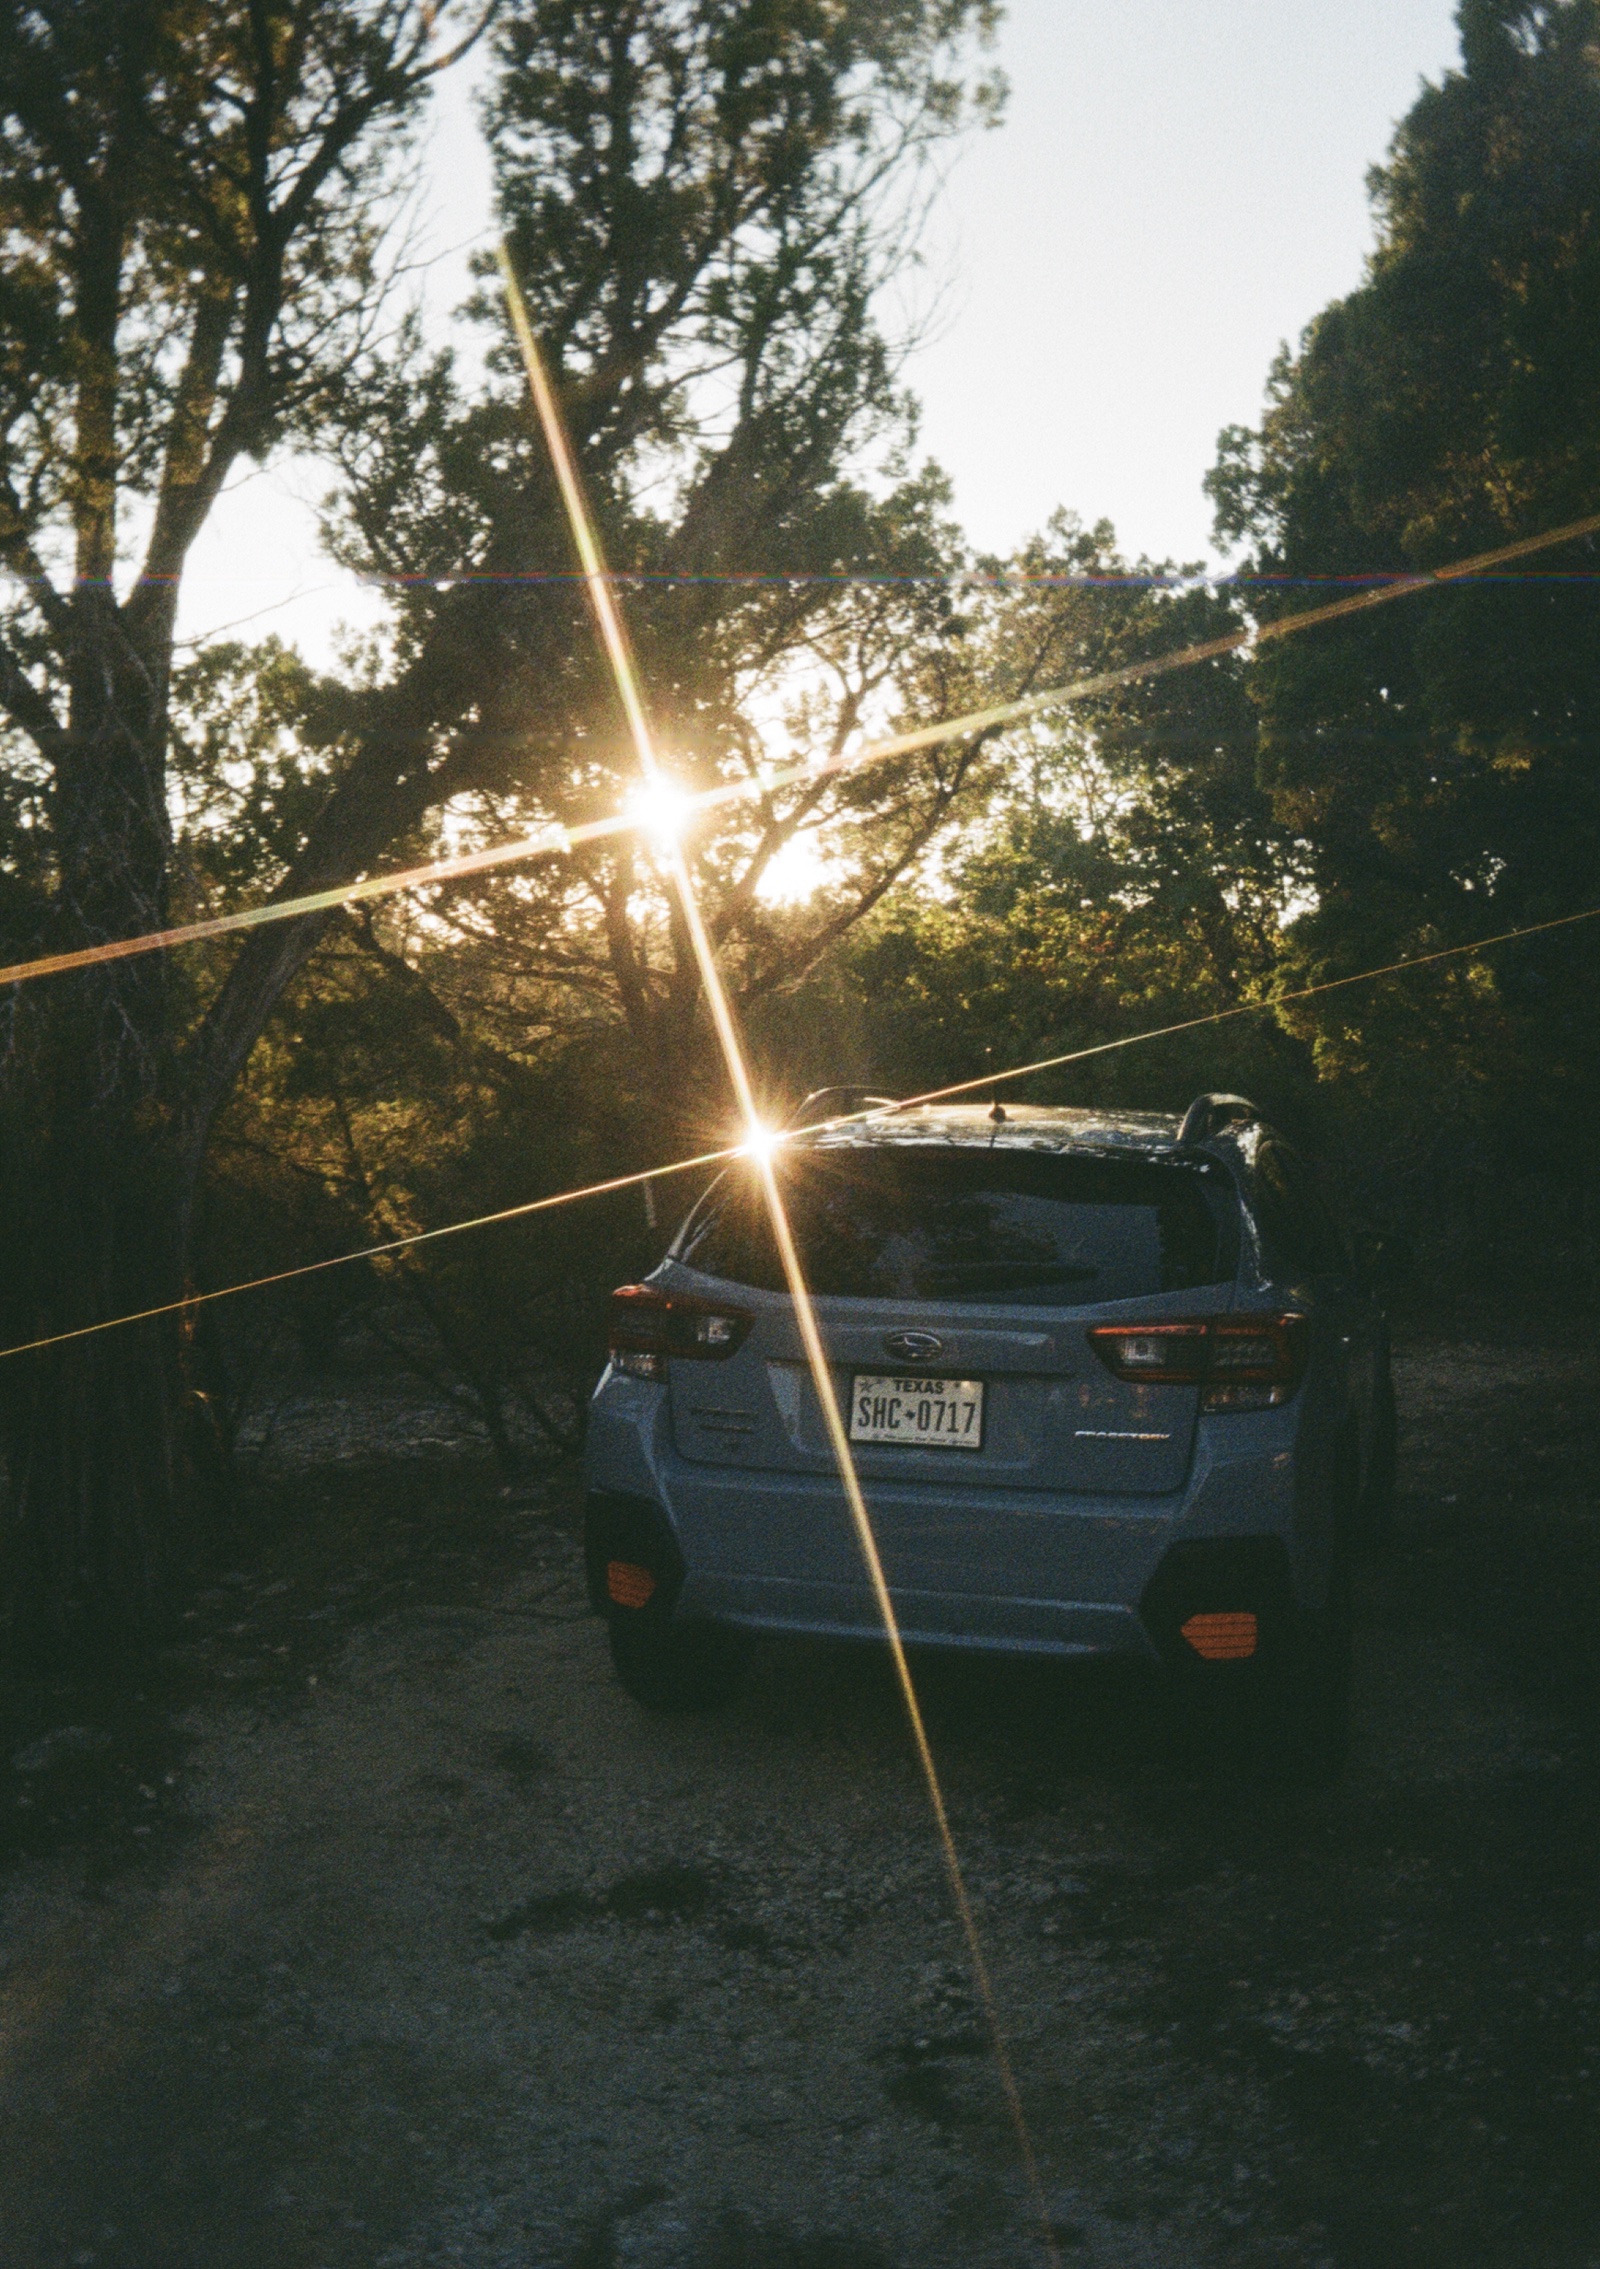 A Subaru surrounded by some trees, and light leaking through